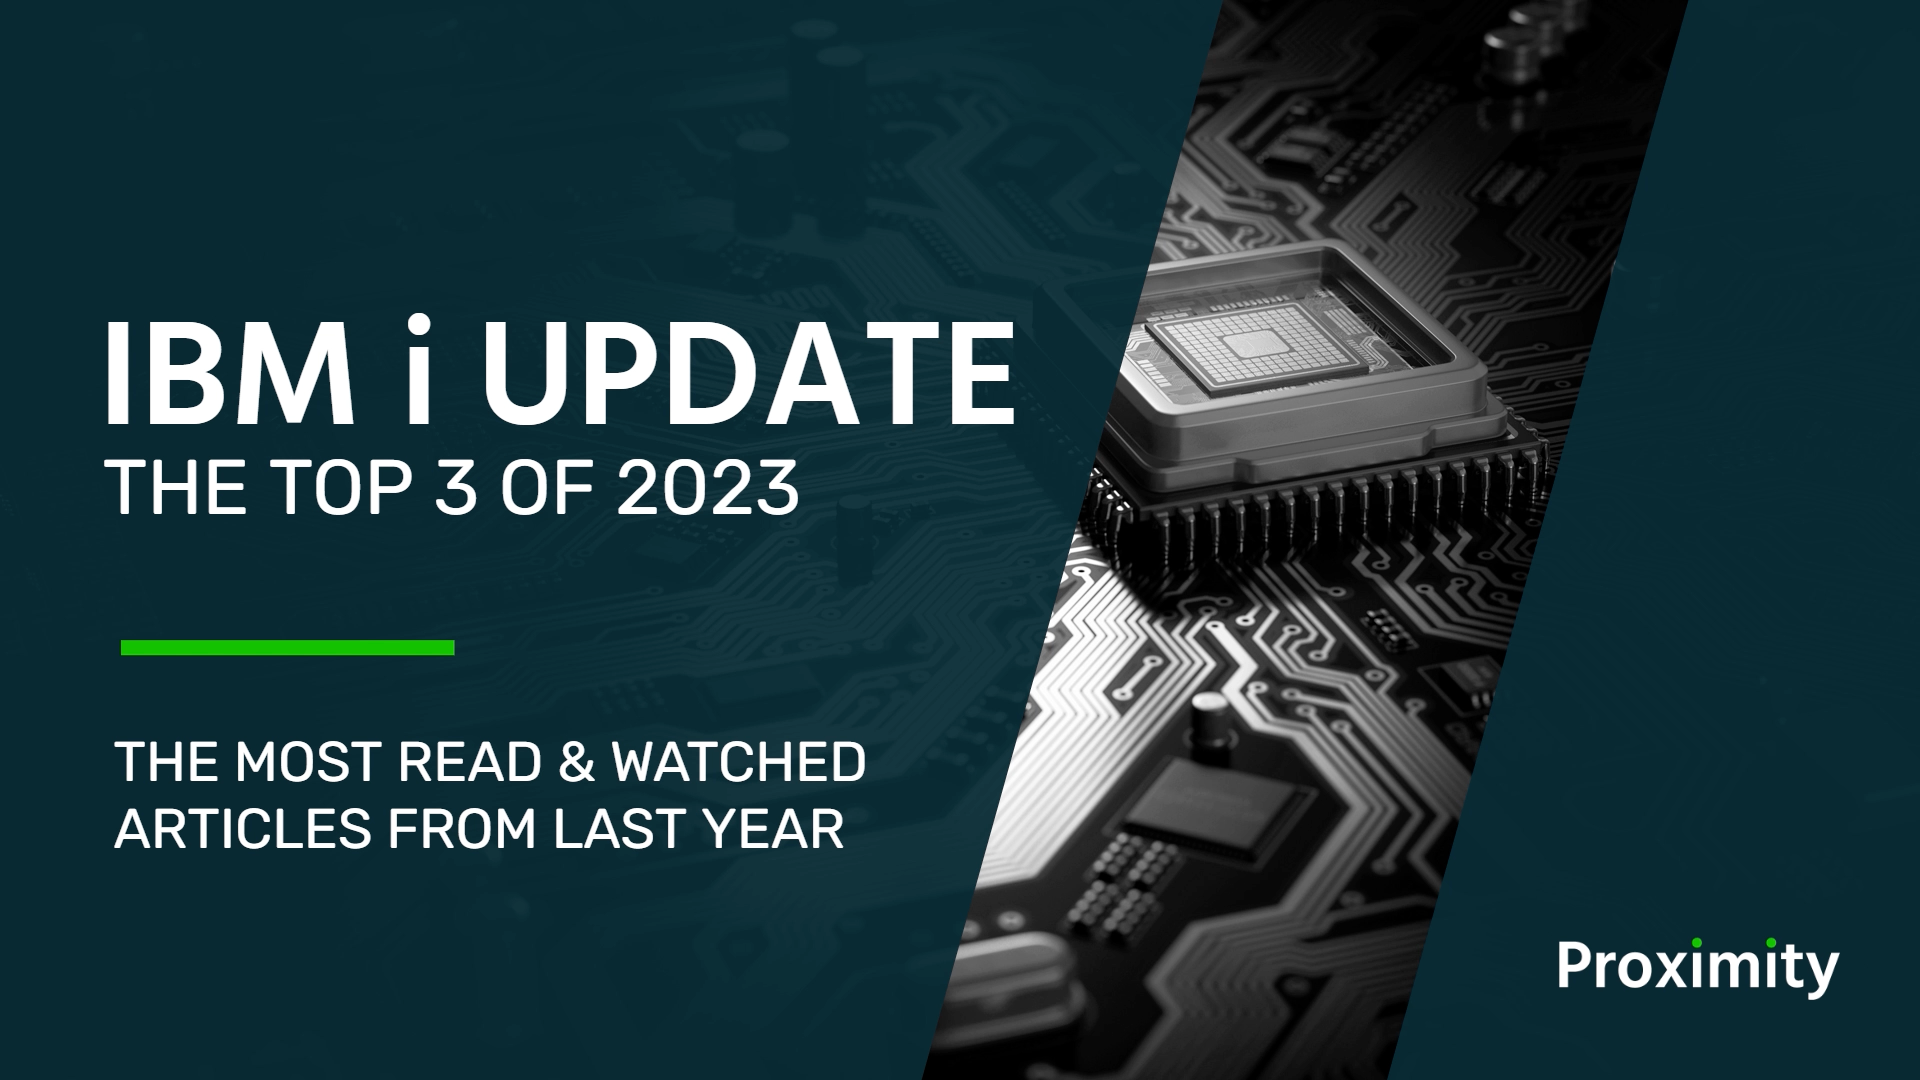 IBM i Update: The Top 3 Stories of 2023